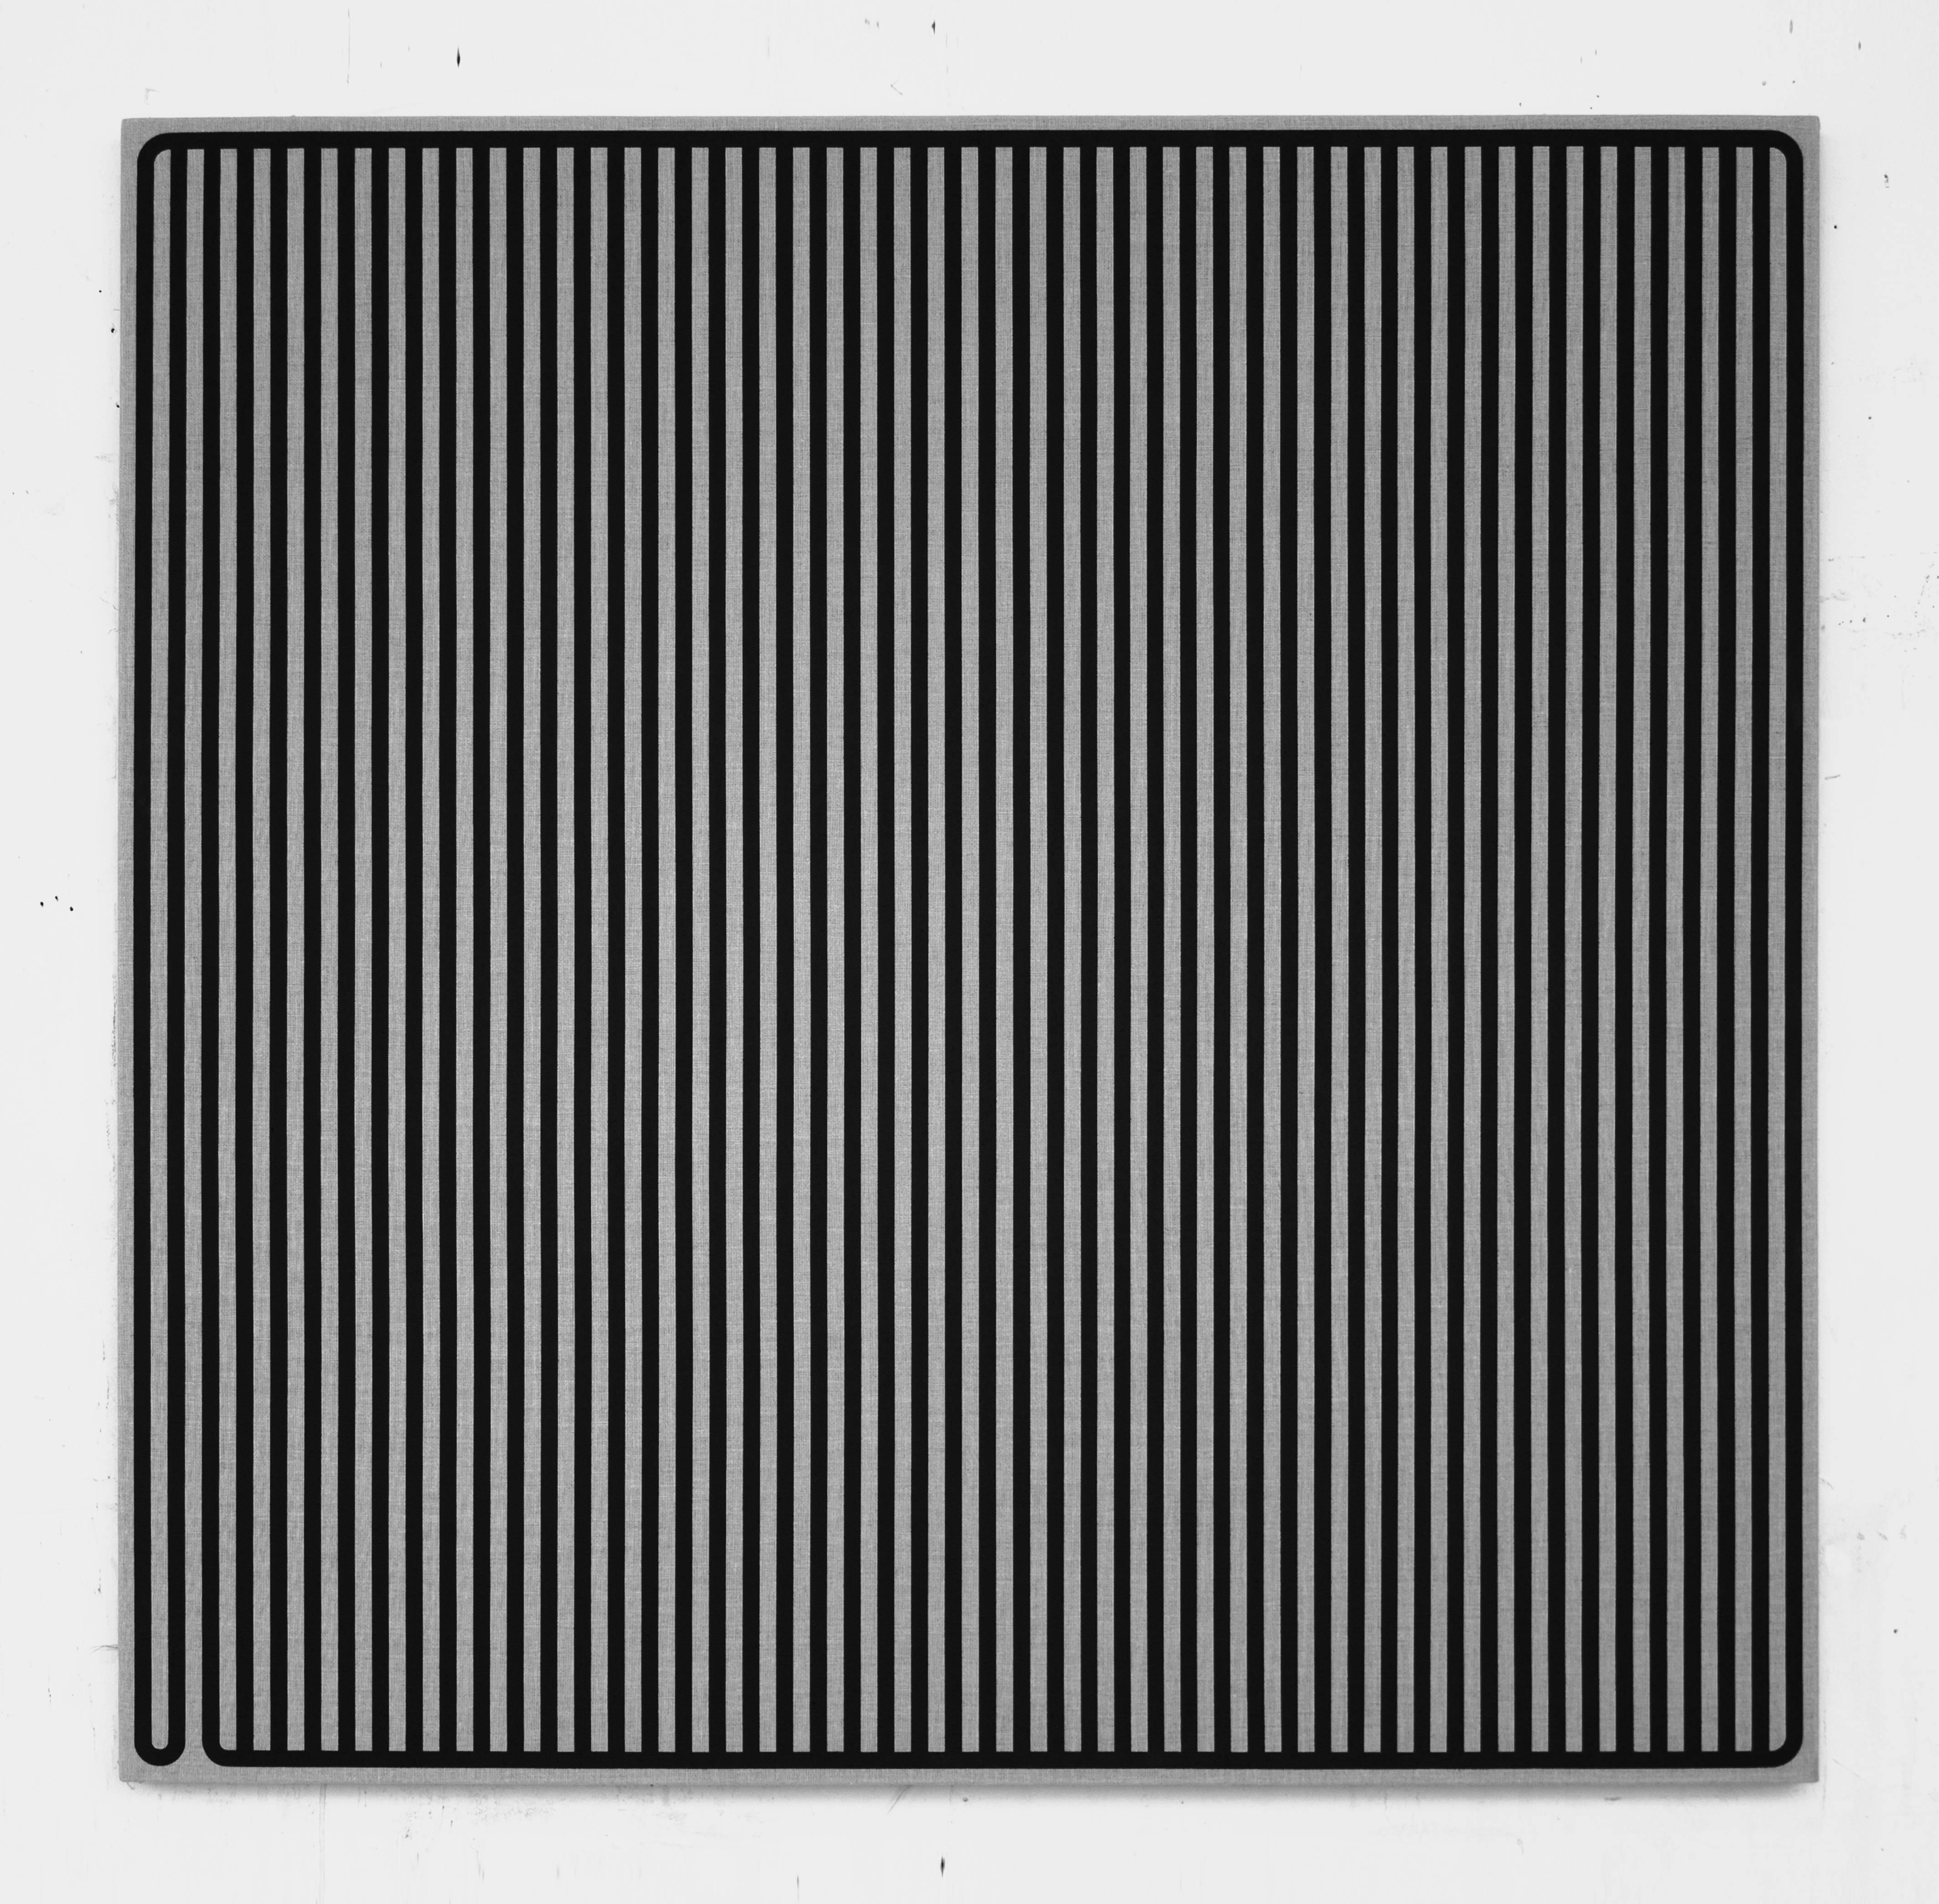 Neil Harrison Abstract Painting - Black Square 66